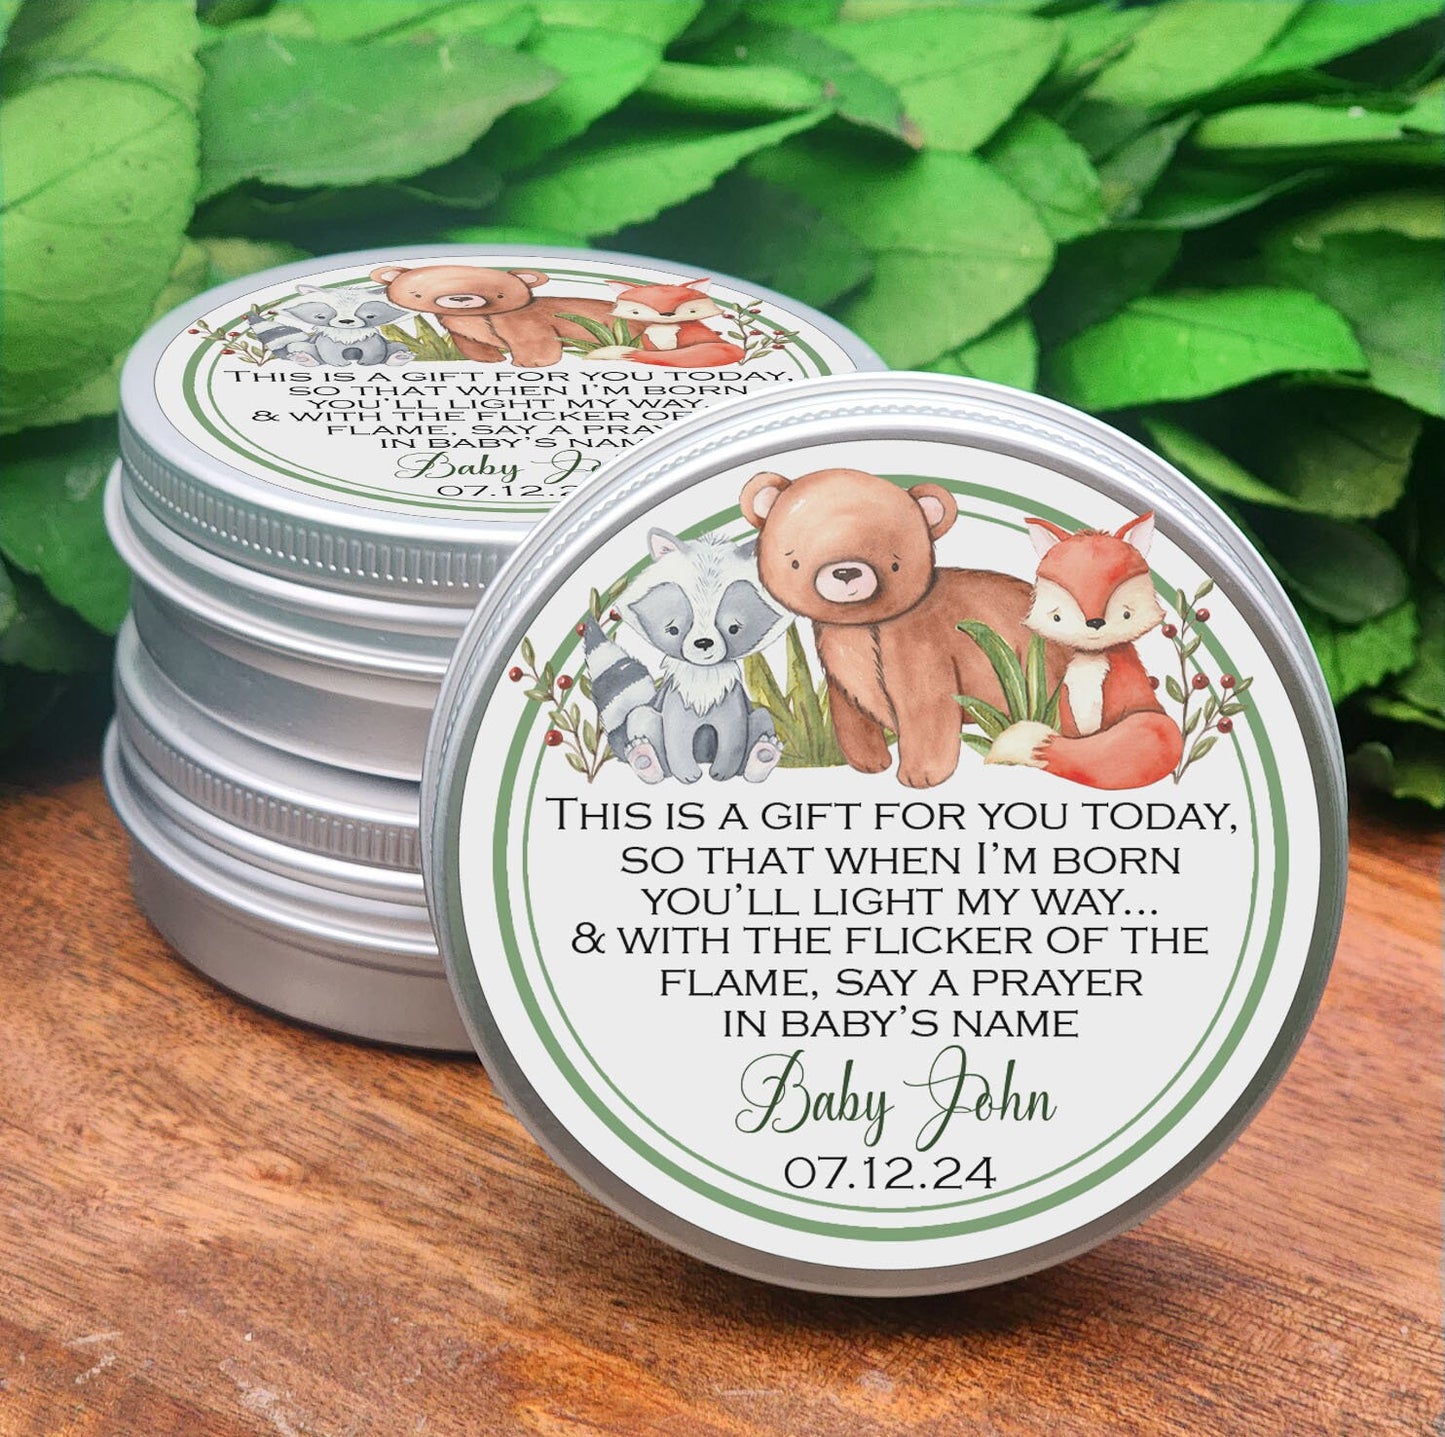 Baby shower woodland theme - woodland theme baby shower - woodland baby shower favors - baby prayer candles - forest baby shower